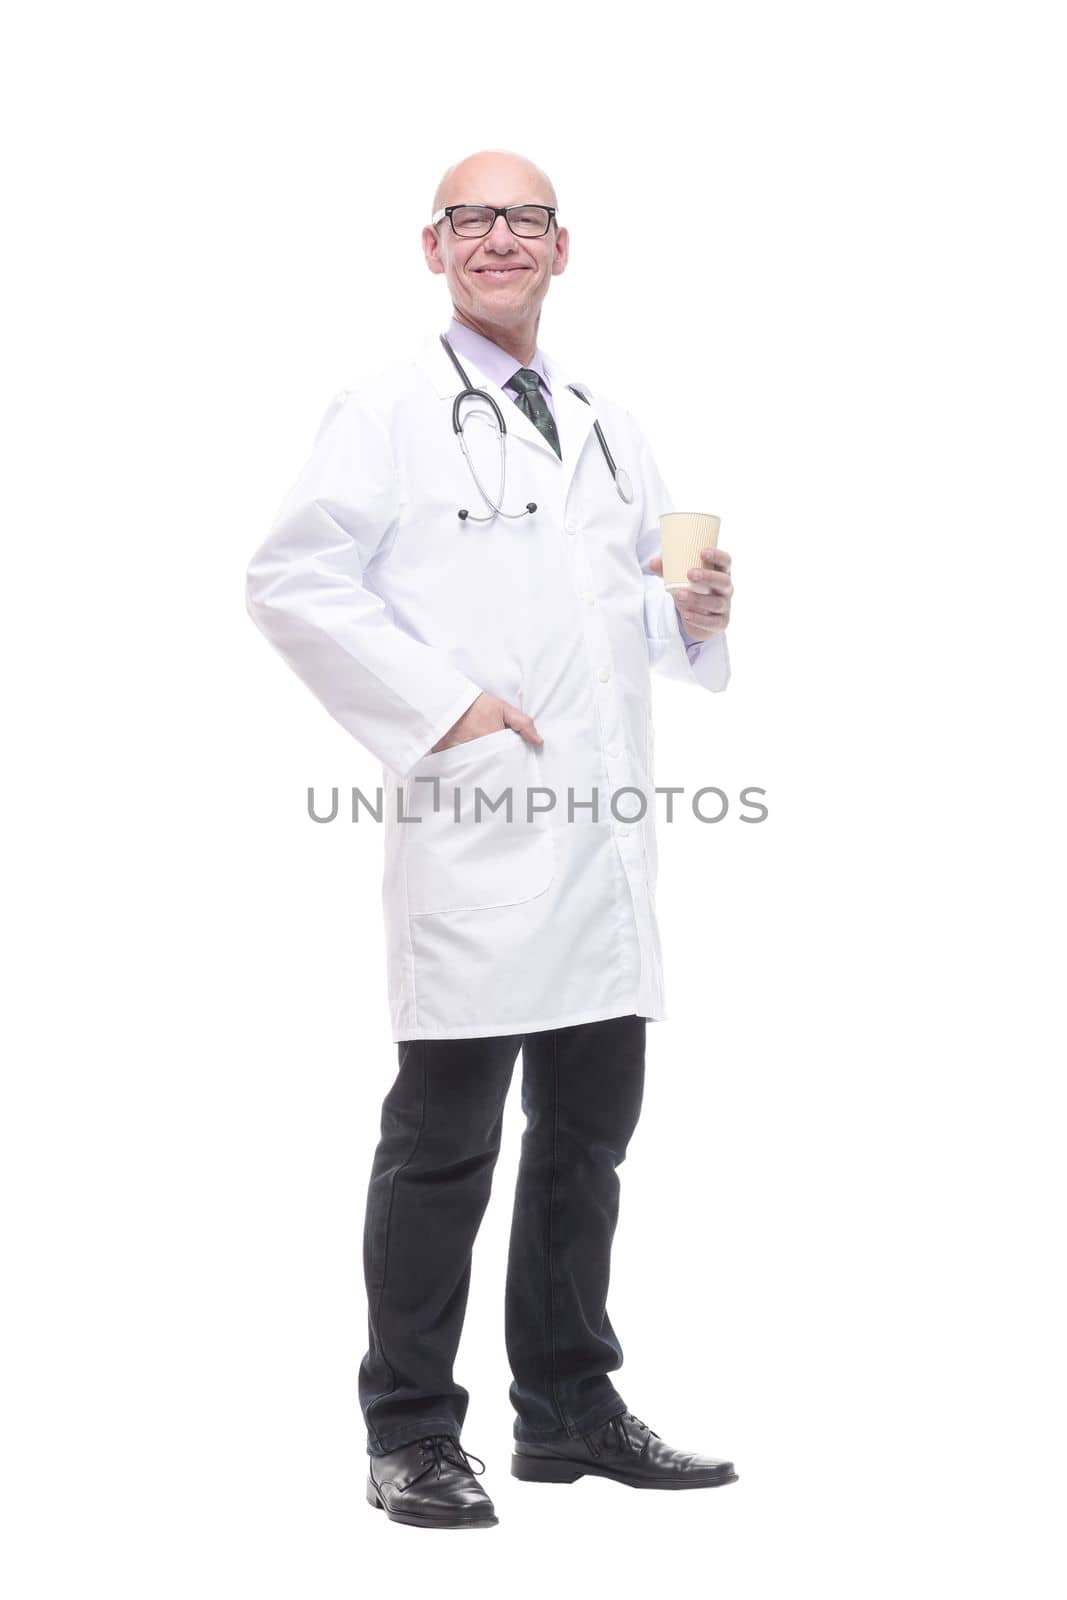 in full growth. smiling doctor with a takeaway coffee. isolated on a white background.